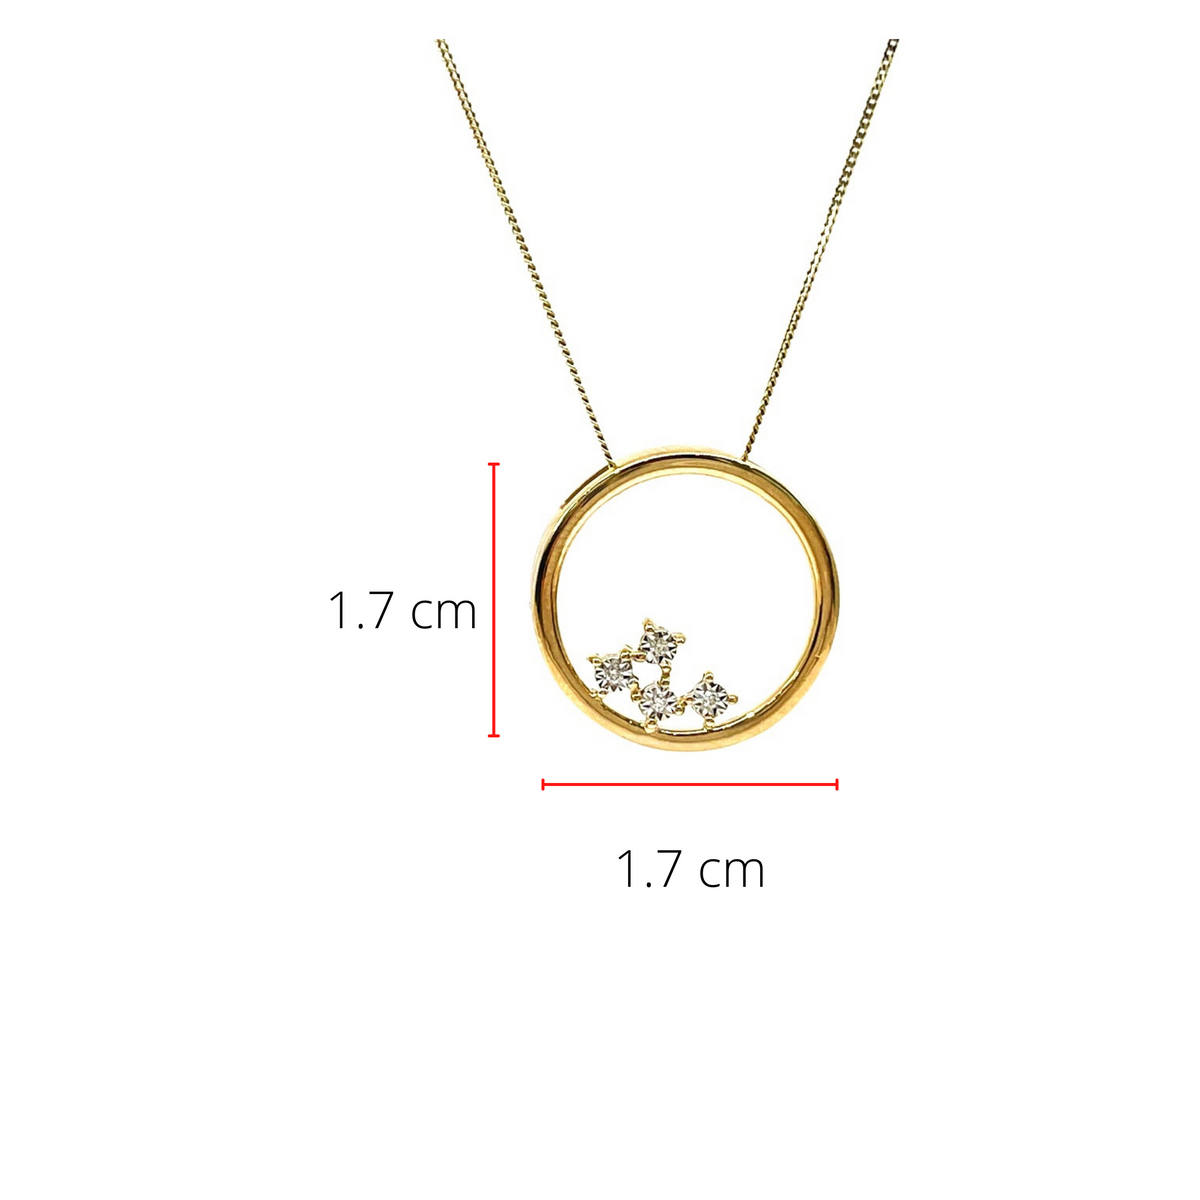 10K Yellow Gold 0.02cttw Diamond Circle Necklace - 18 Inches